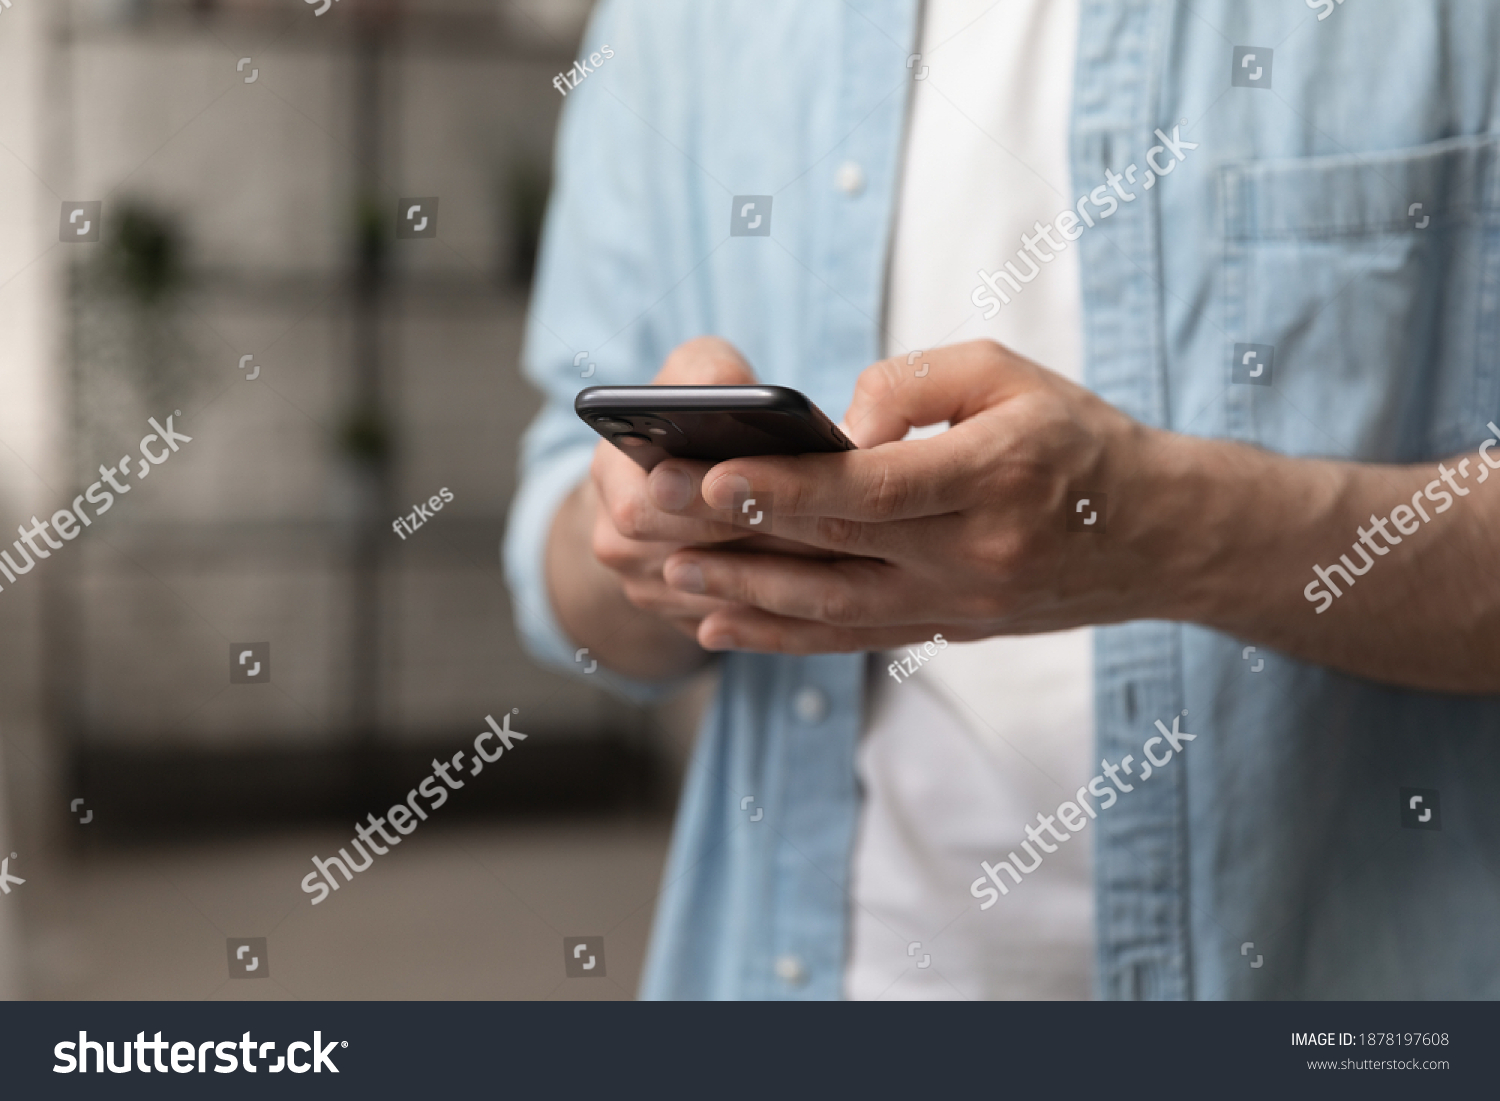 Virtual communication. Male hands holding new smartphone model touching sensor screen to browse internet. Close up of man viewing website social network connecting with shop bank chatting using cell #1878197608